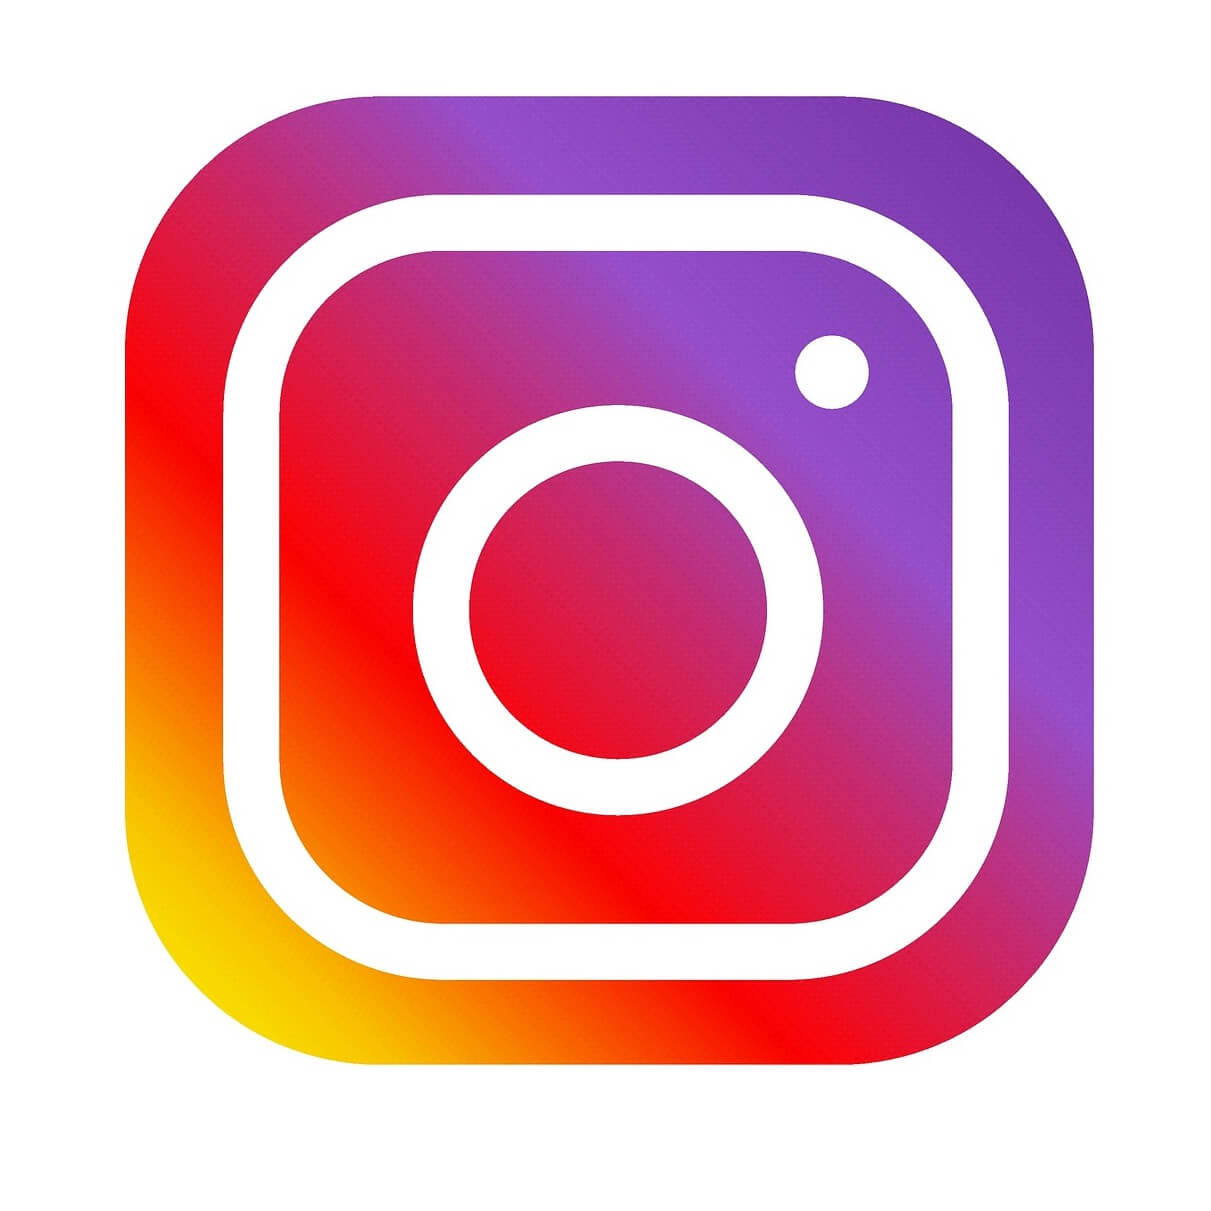 What to do if Windows 10 Instagram app is not working